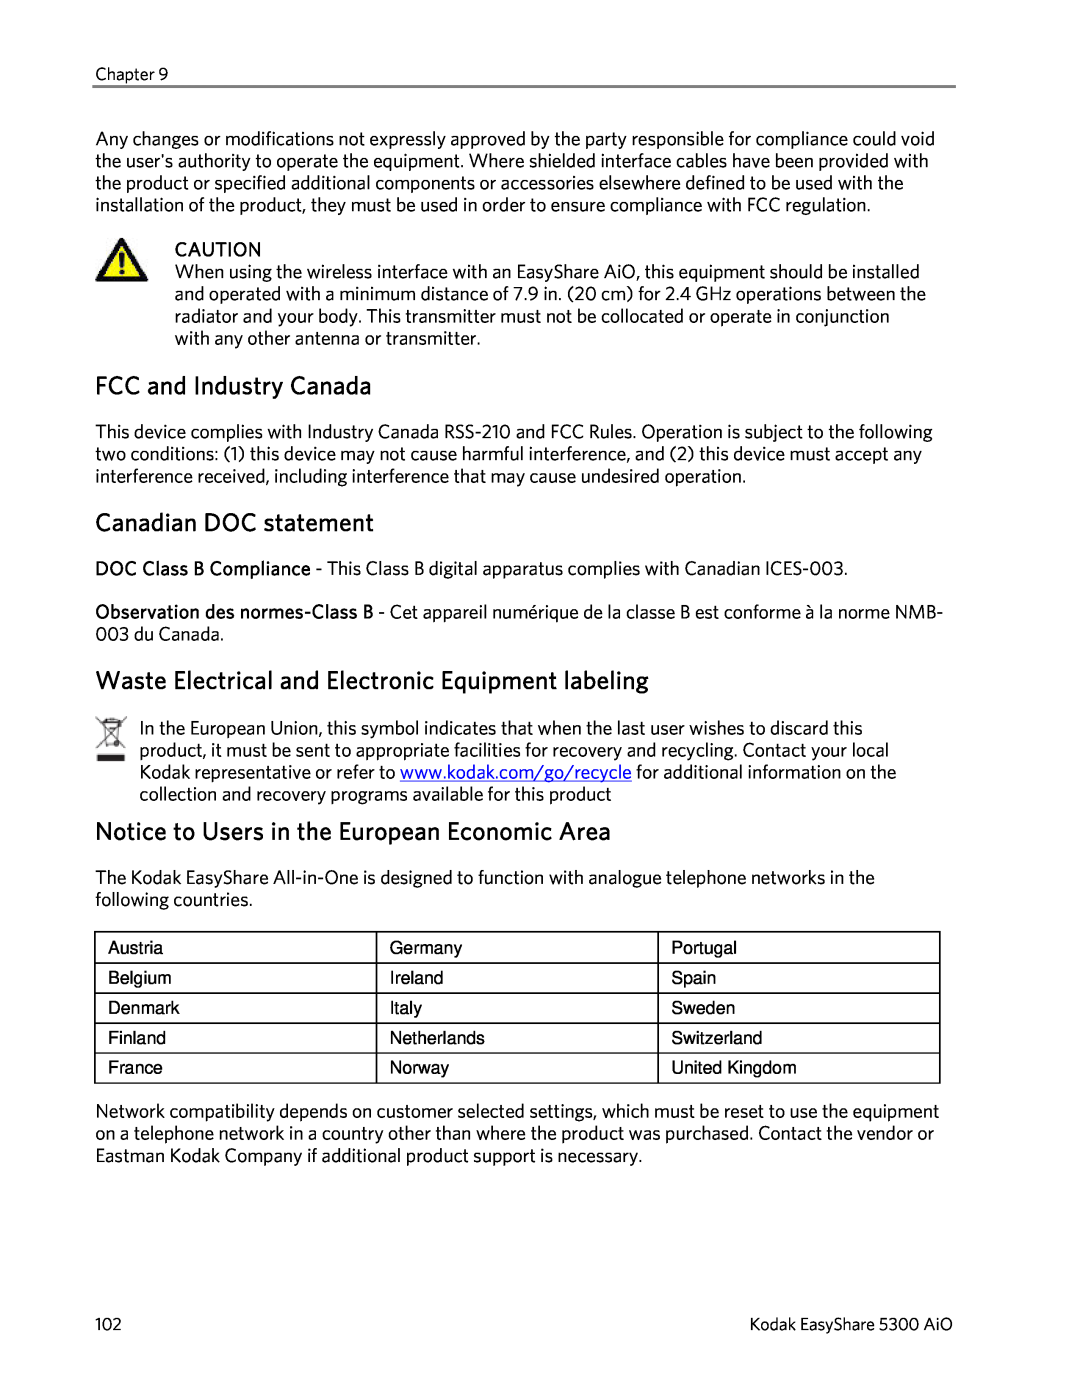 Kodak 5300 manual FCC and Industry Canada, Canadian DOC statement, Waste Electrical and Electronic Equipment labeling 